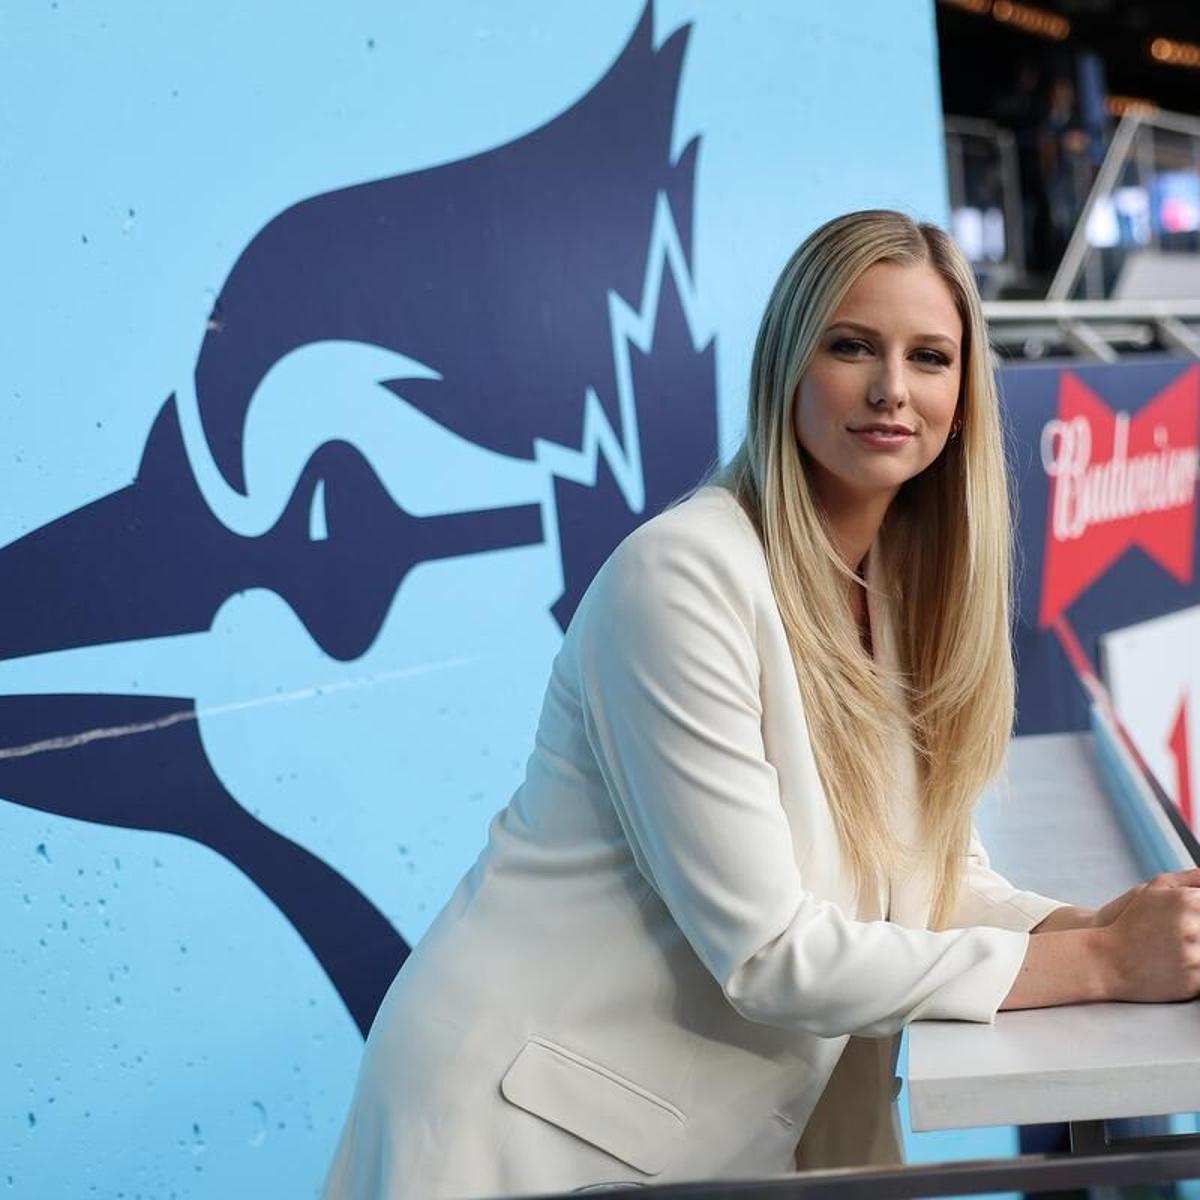 Blue Jays analyst Madison Shipman's journey to the big leagues